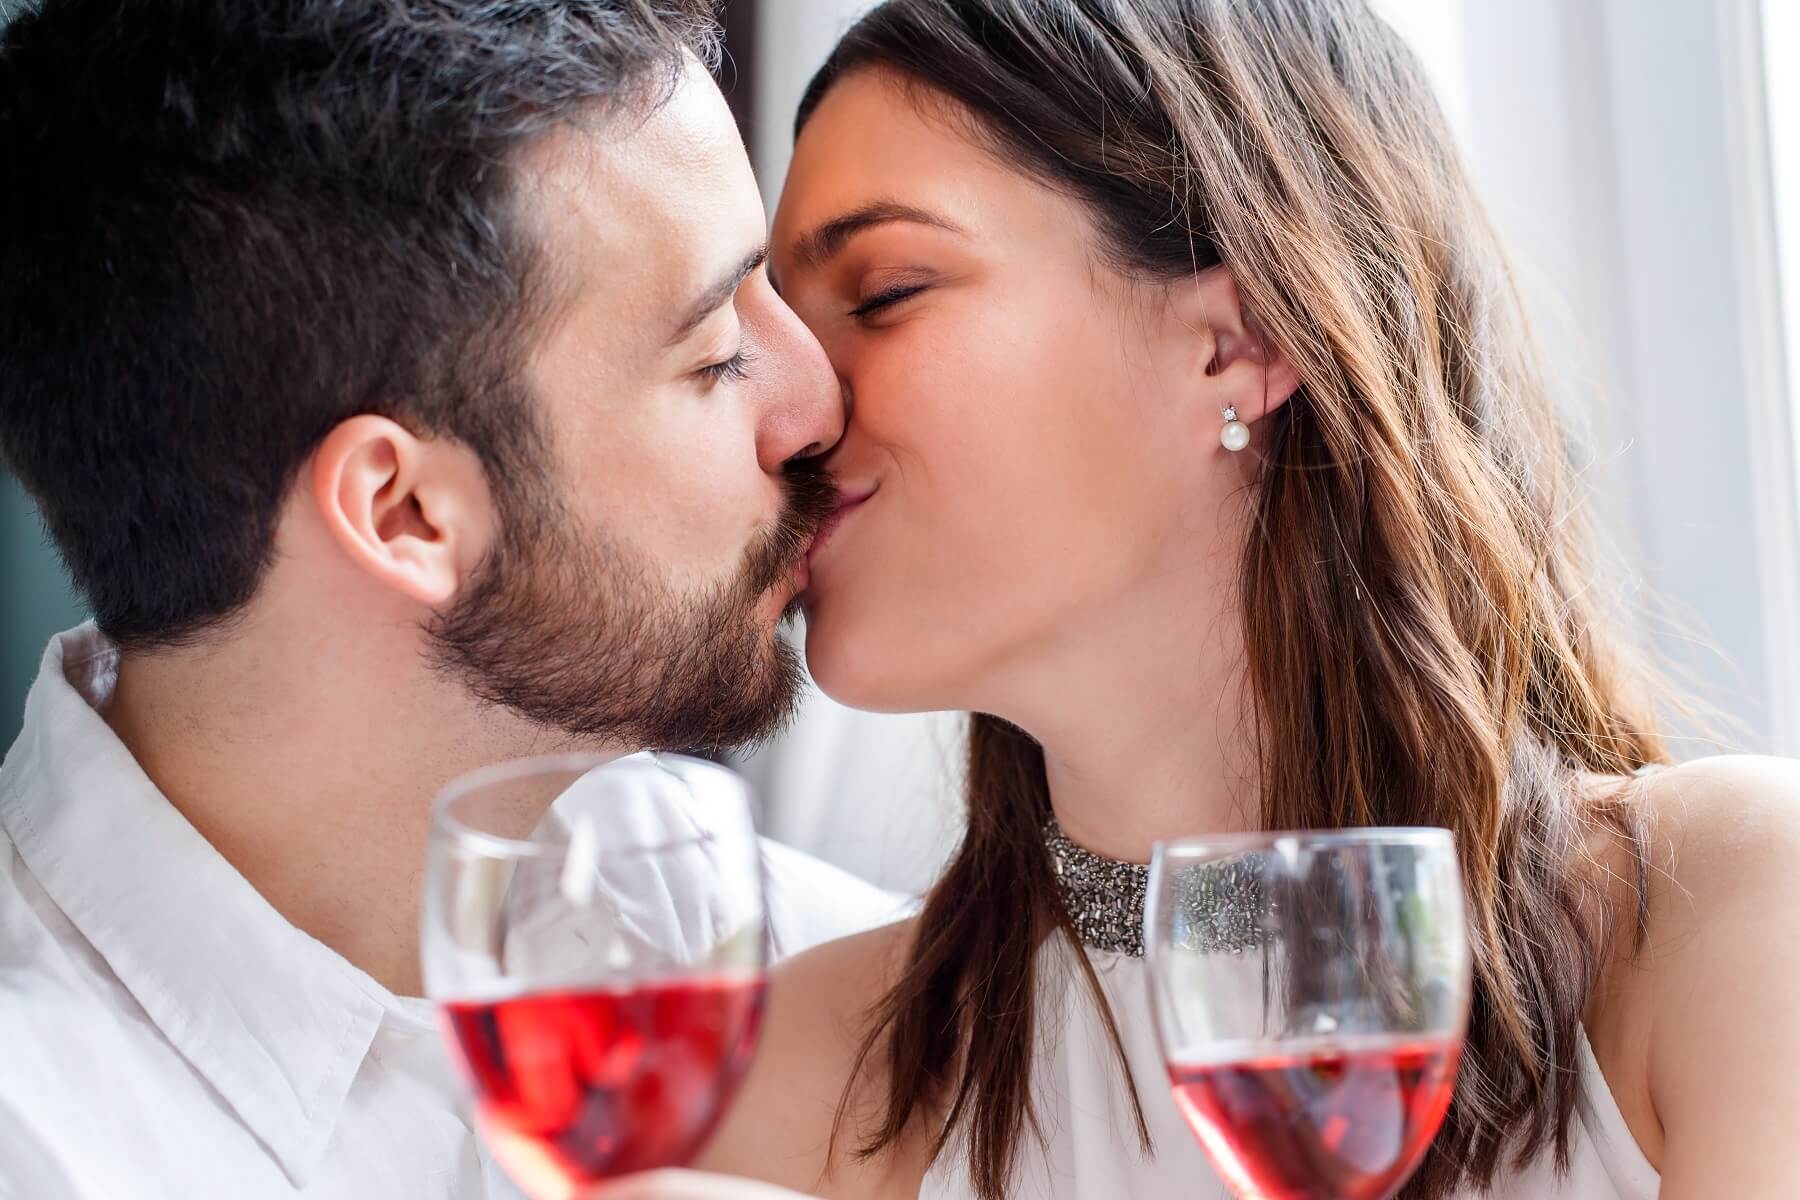 4 Most Common Valentine's Date Night People - Which One Are You?